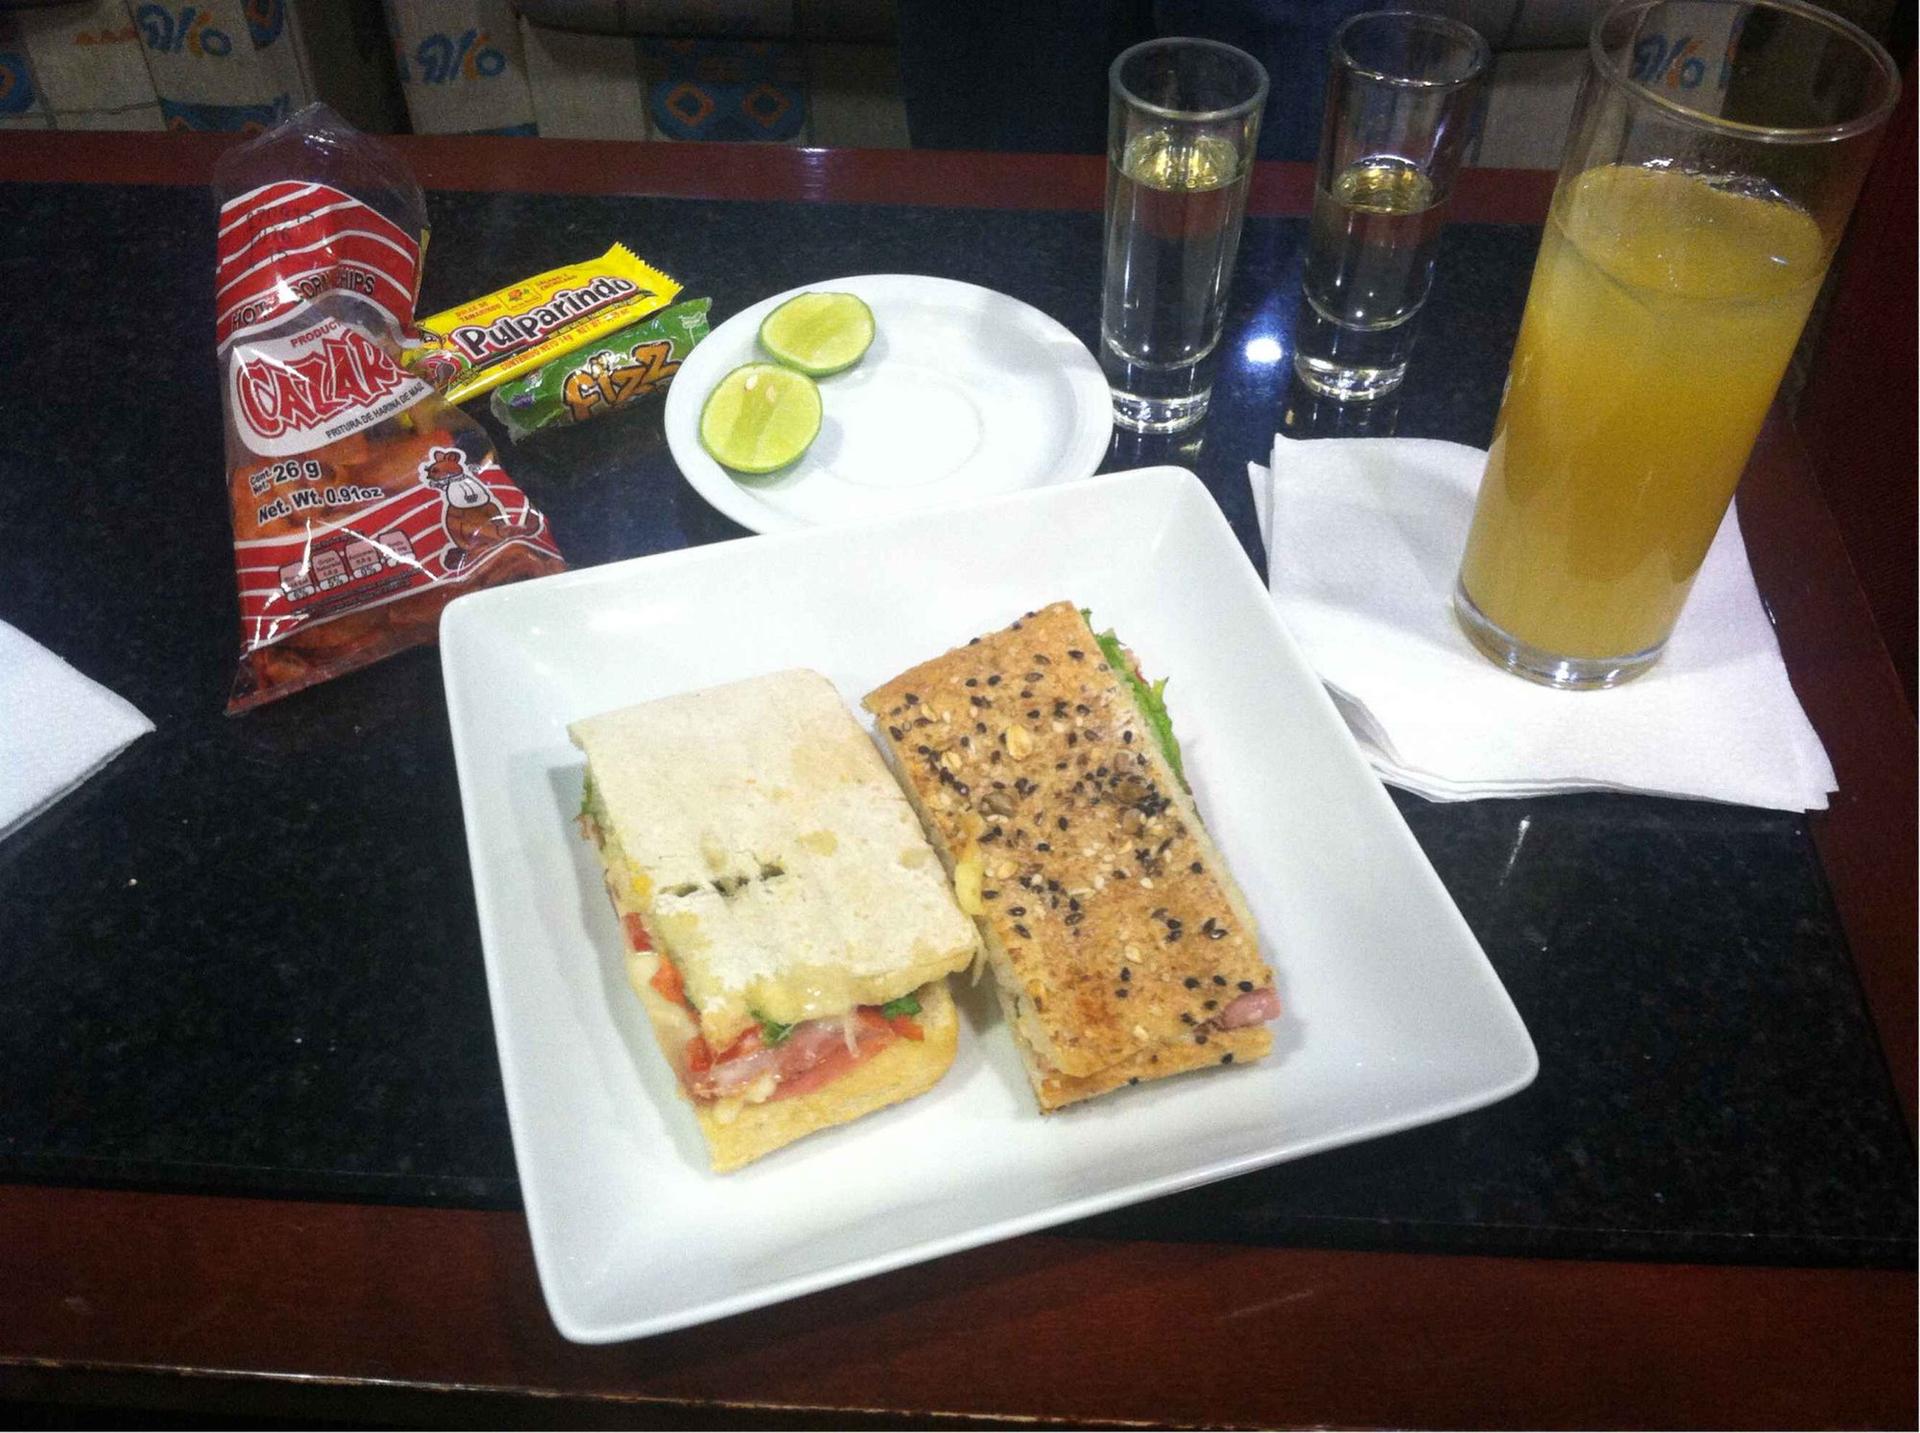 American Airlines Admirals Club image 11 of 32